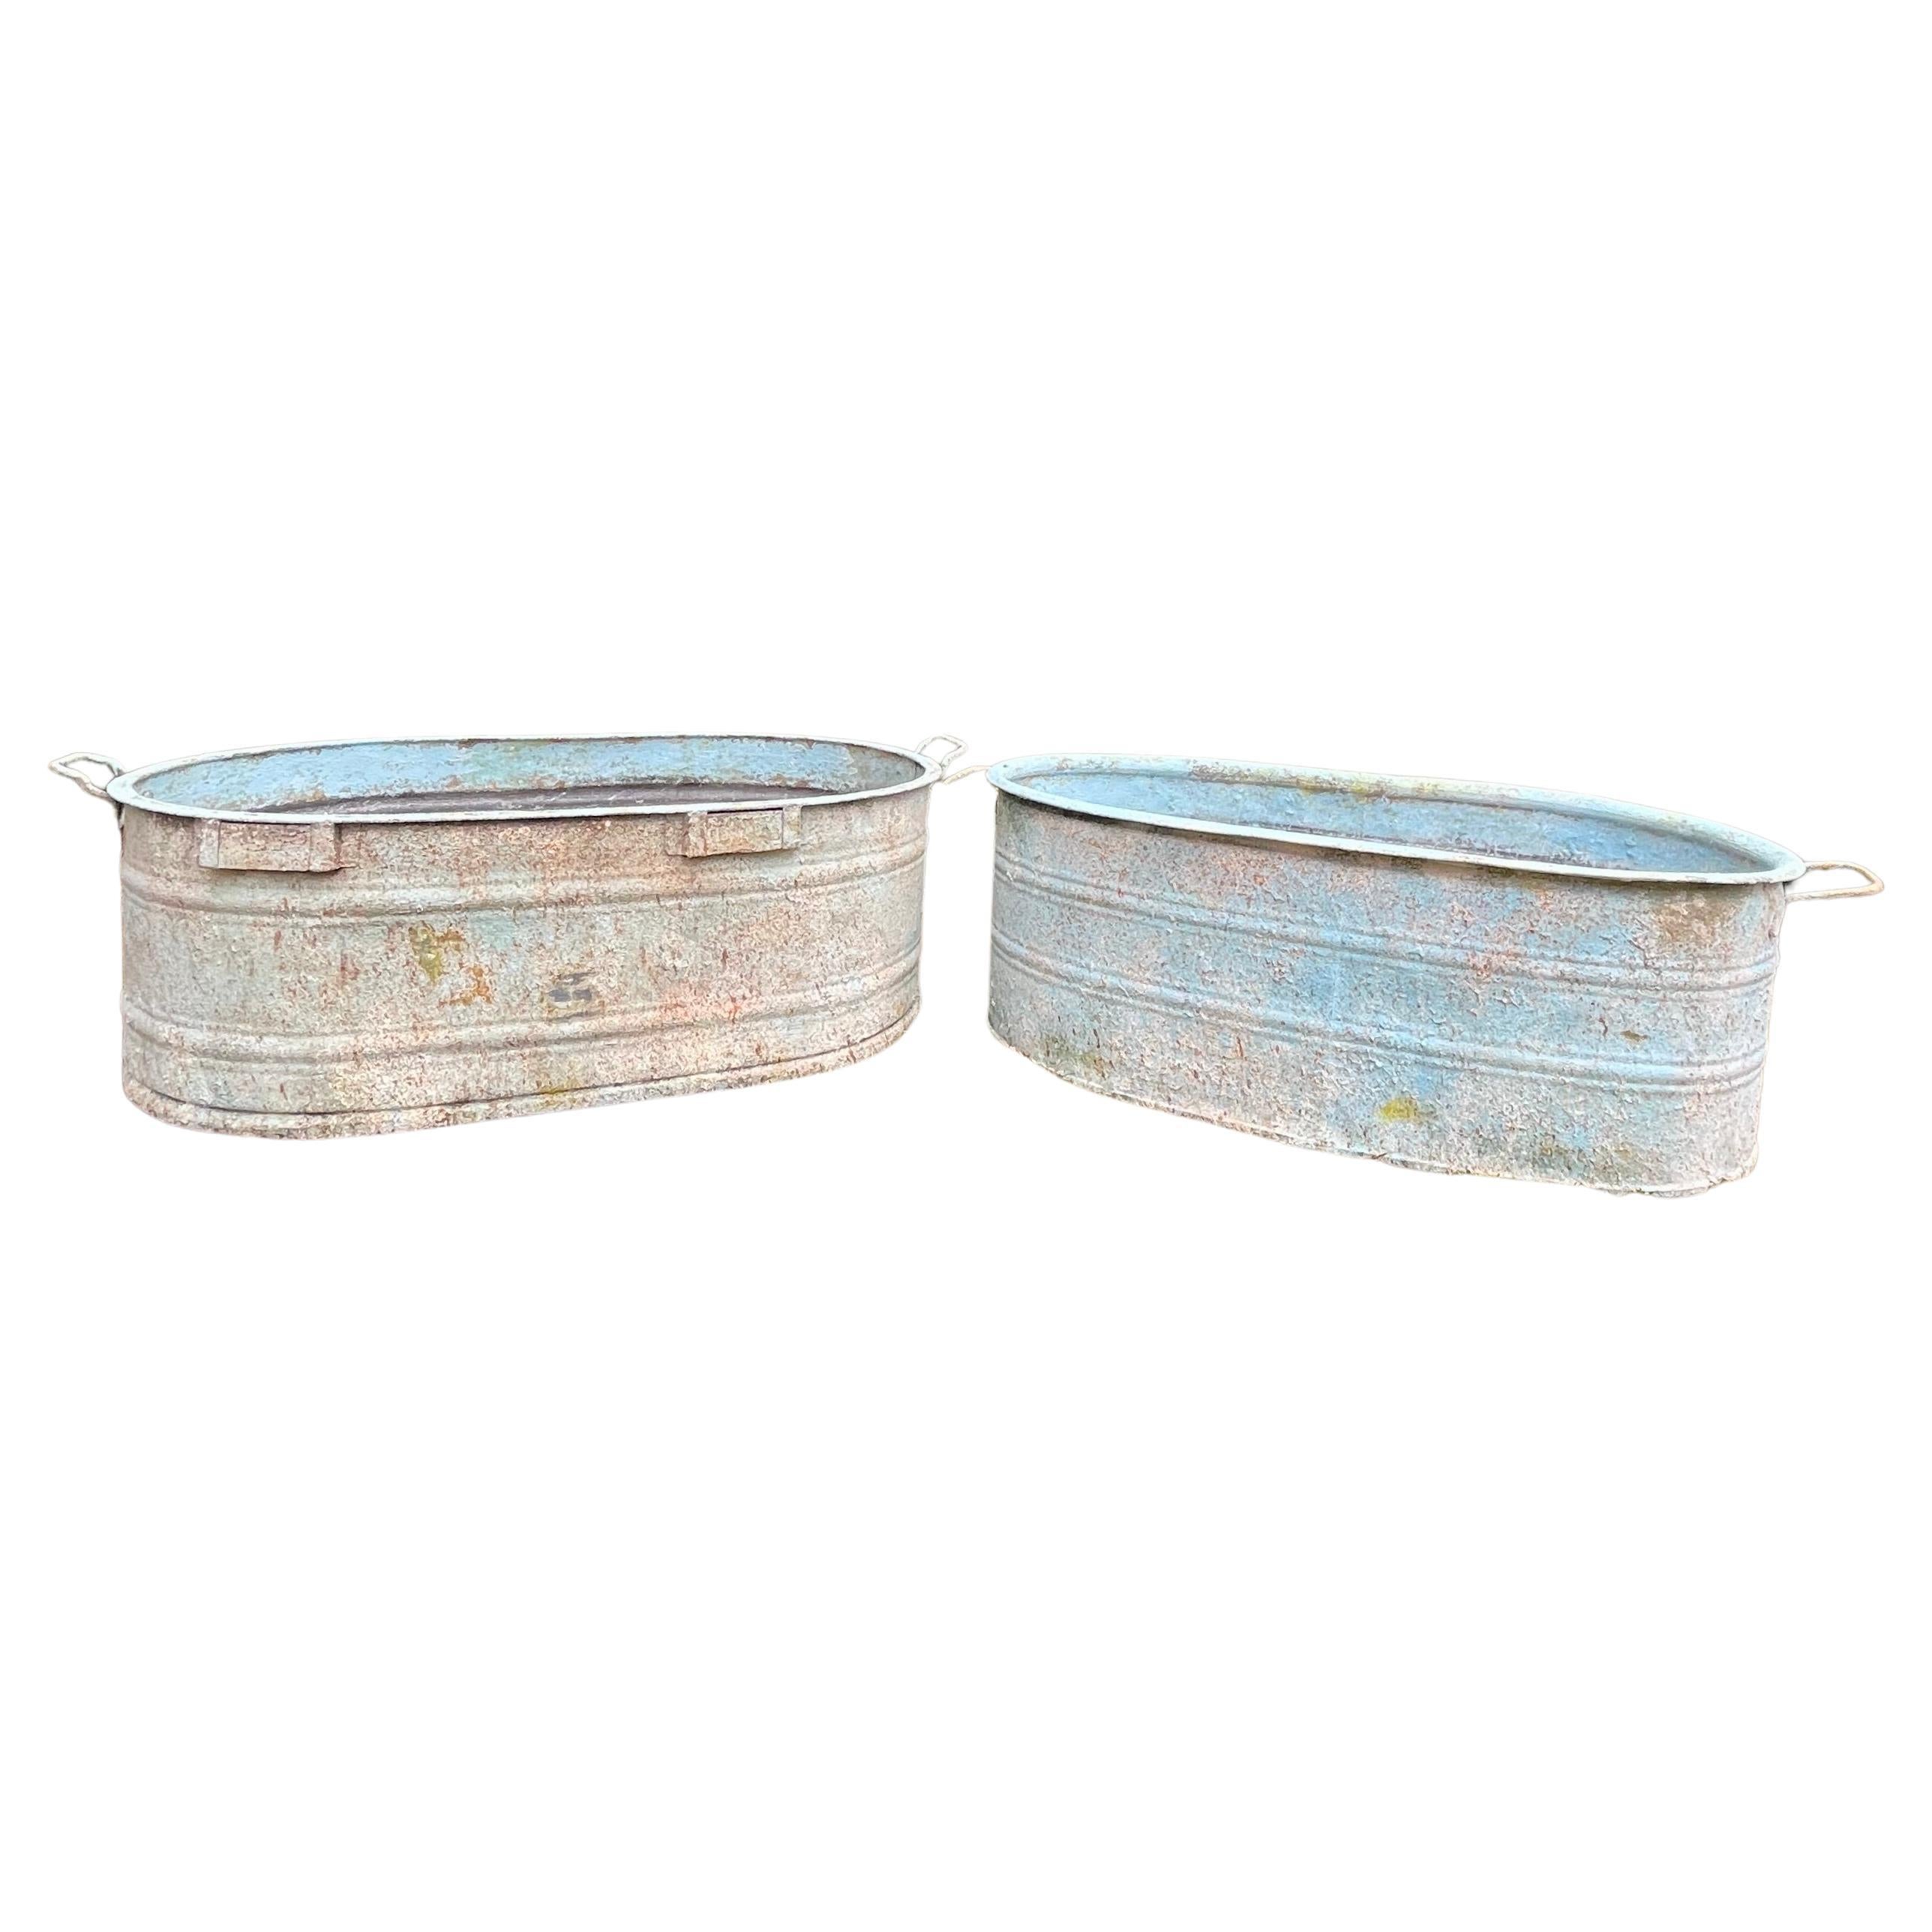 Near-Pair of Very Large German Oval Galvanized Planters #2 with Custom Surface For Sale